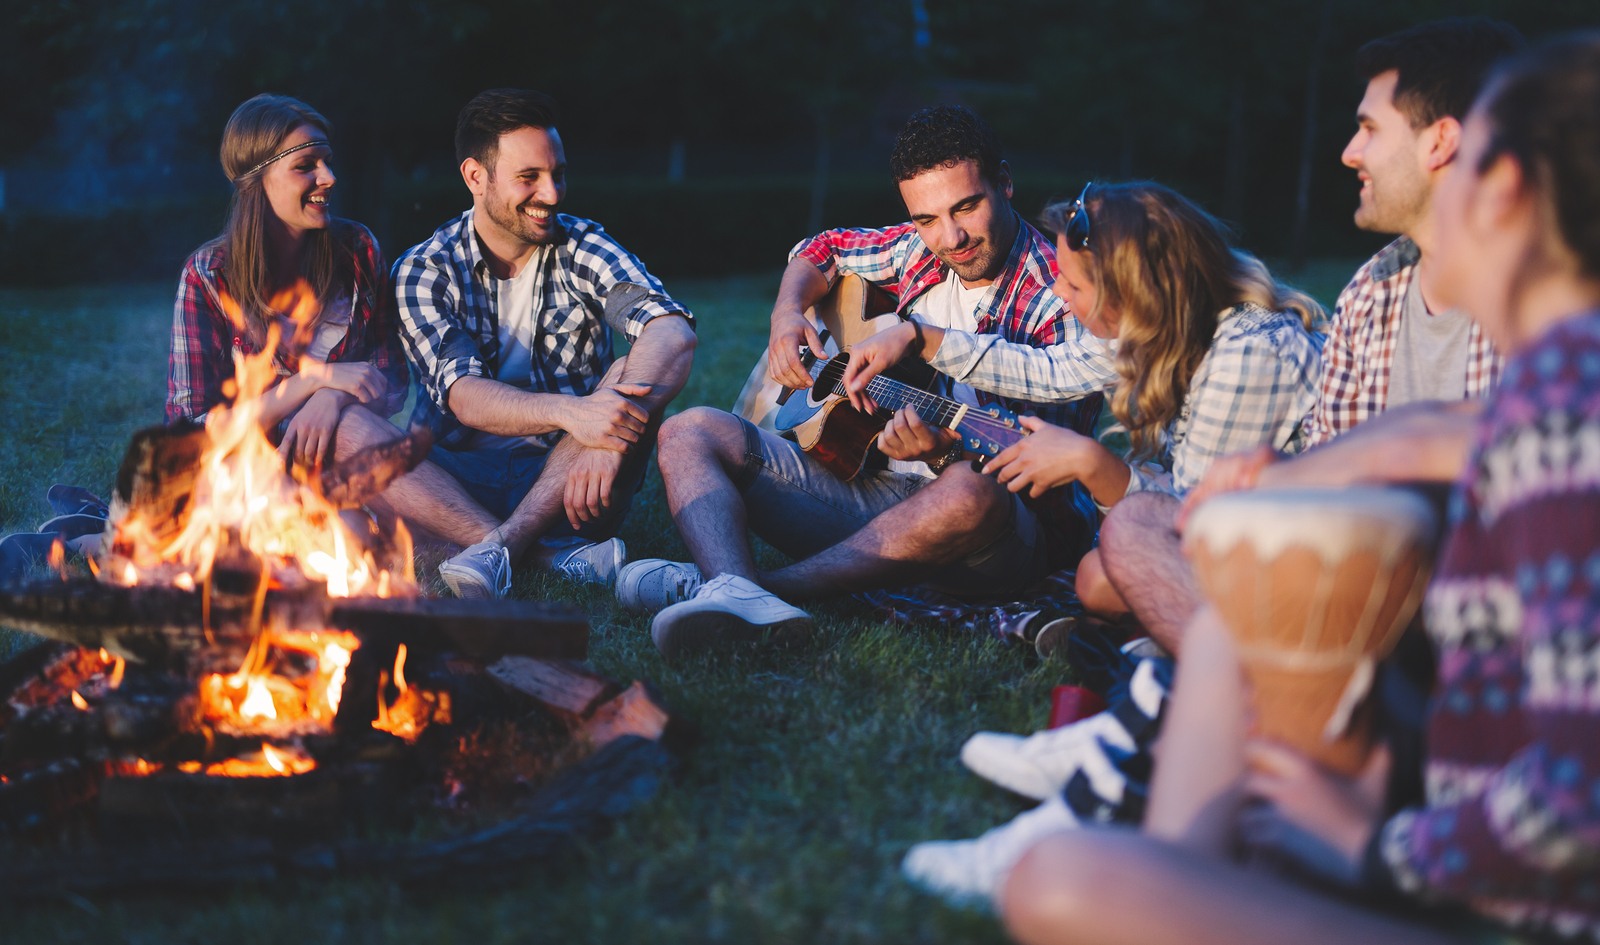 Going outdoor with your friends is a pleasurable way to stay warm in a tent